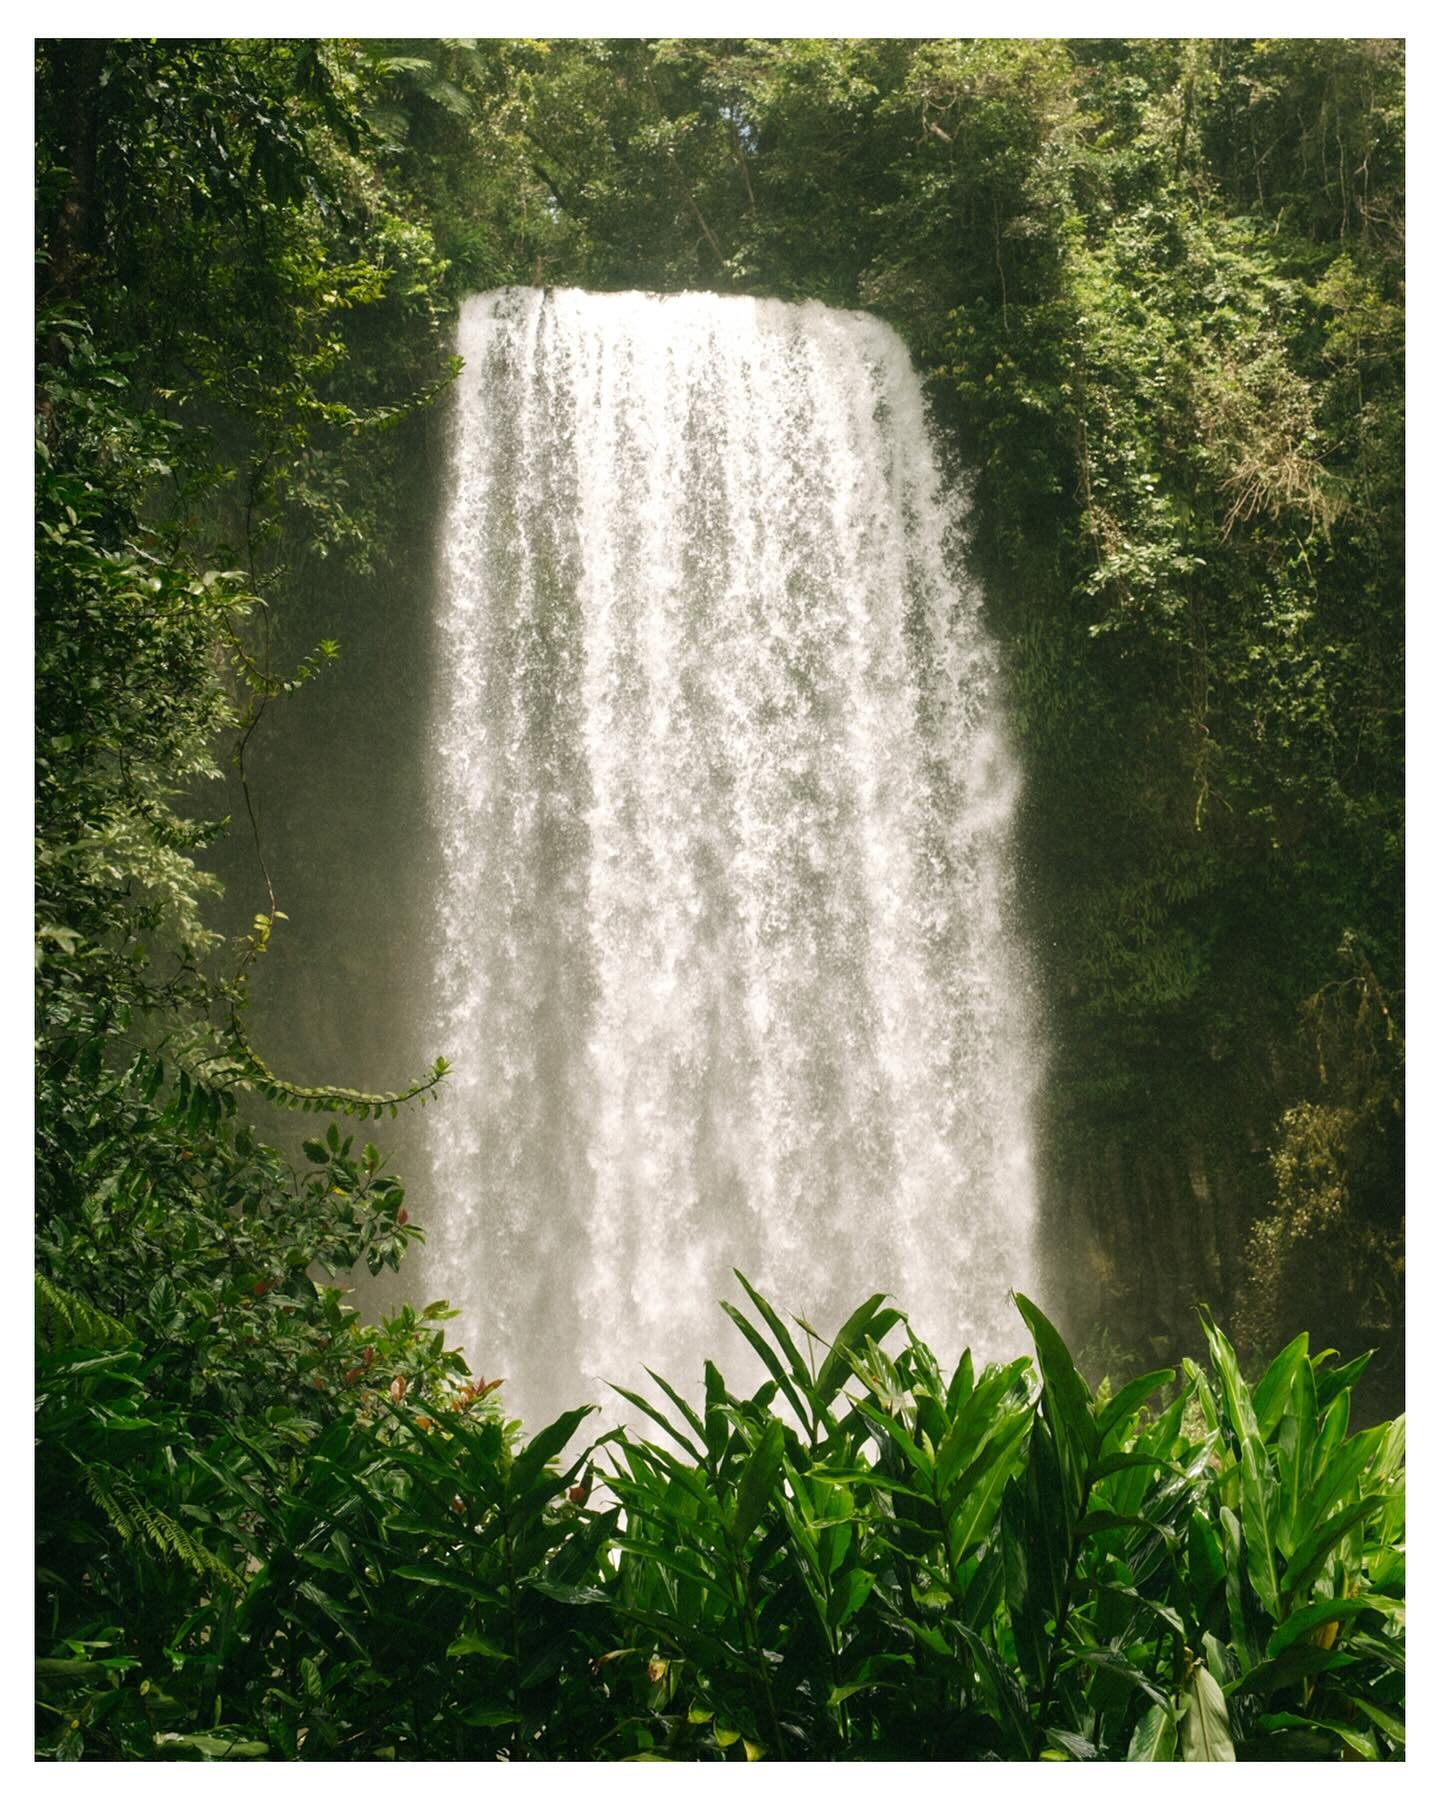 Chasing waterfalls | Queensland, Australia
The rainforest, particularly a tropical one, is such a foreign environment to us. We found so much fascination in the every detail and seeing life exist on every conceivable surface. Still struggling with ed